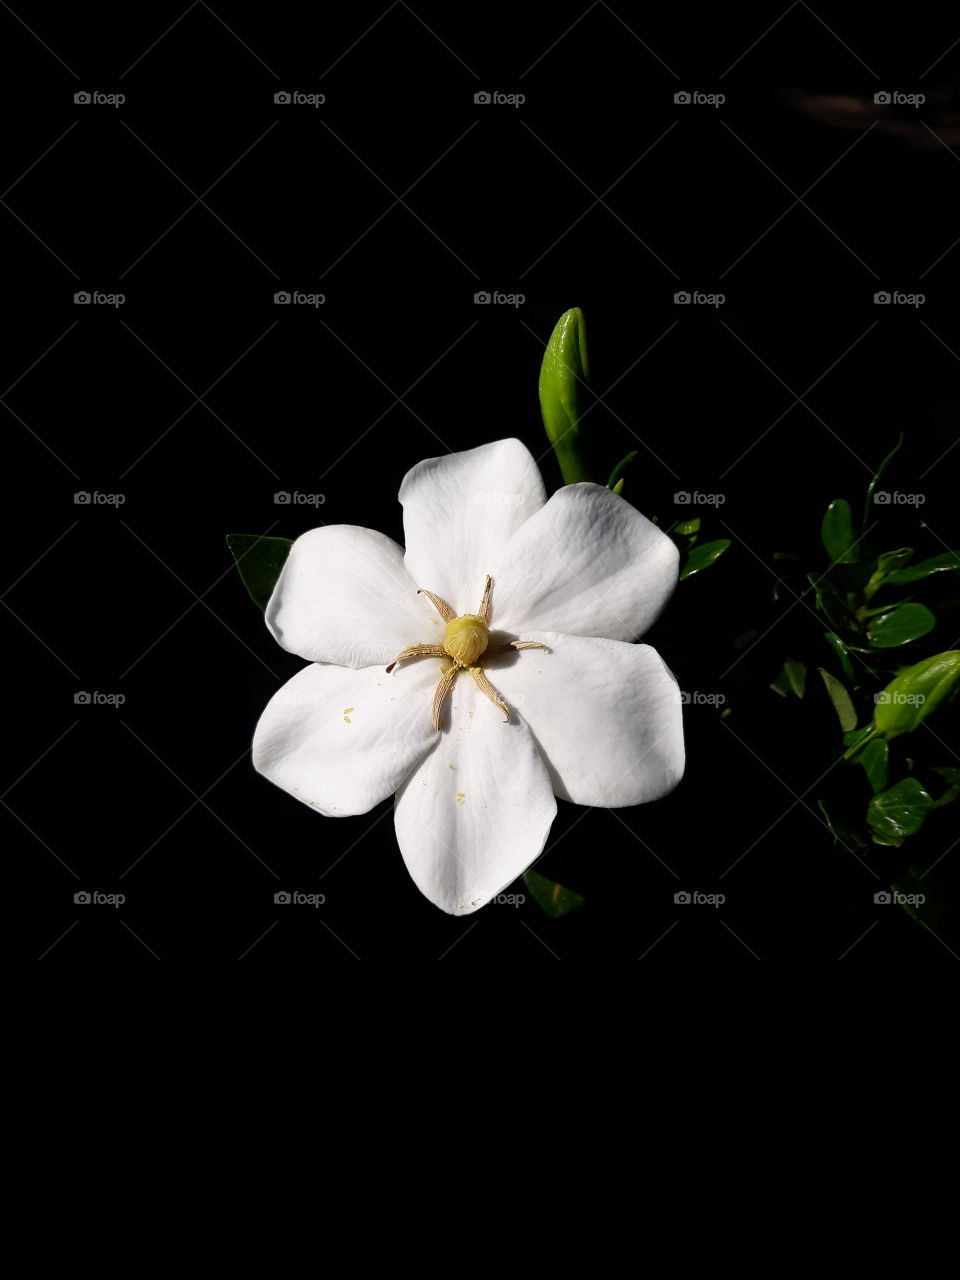 Gardenia flower showing off all her beauty with new buds waiting patiently for their turn in the background